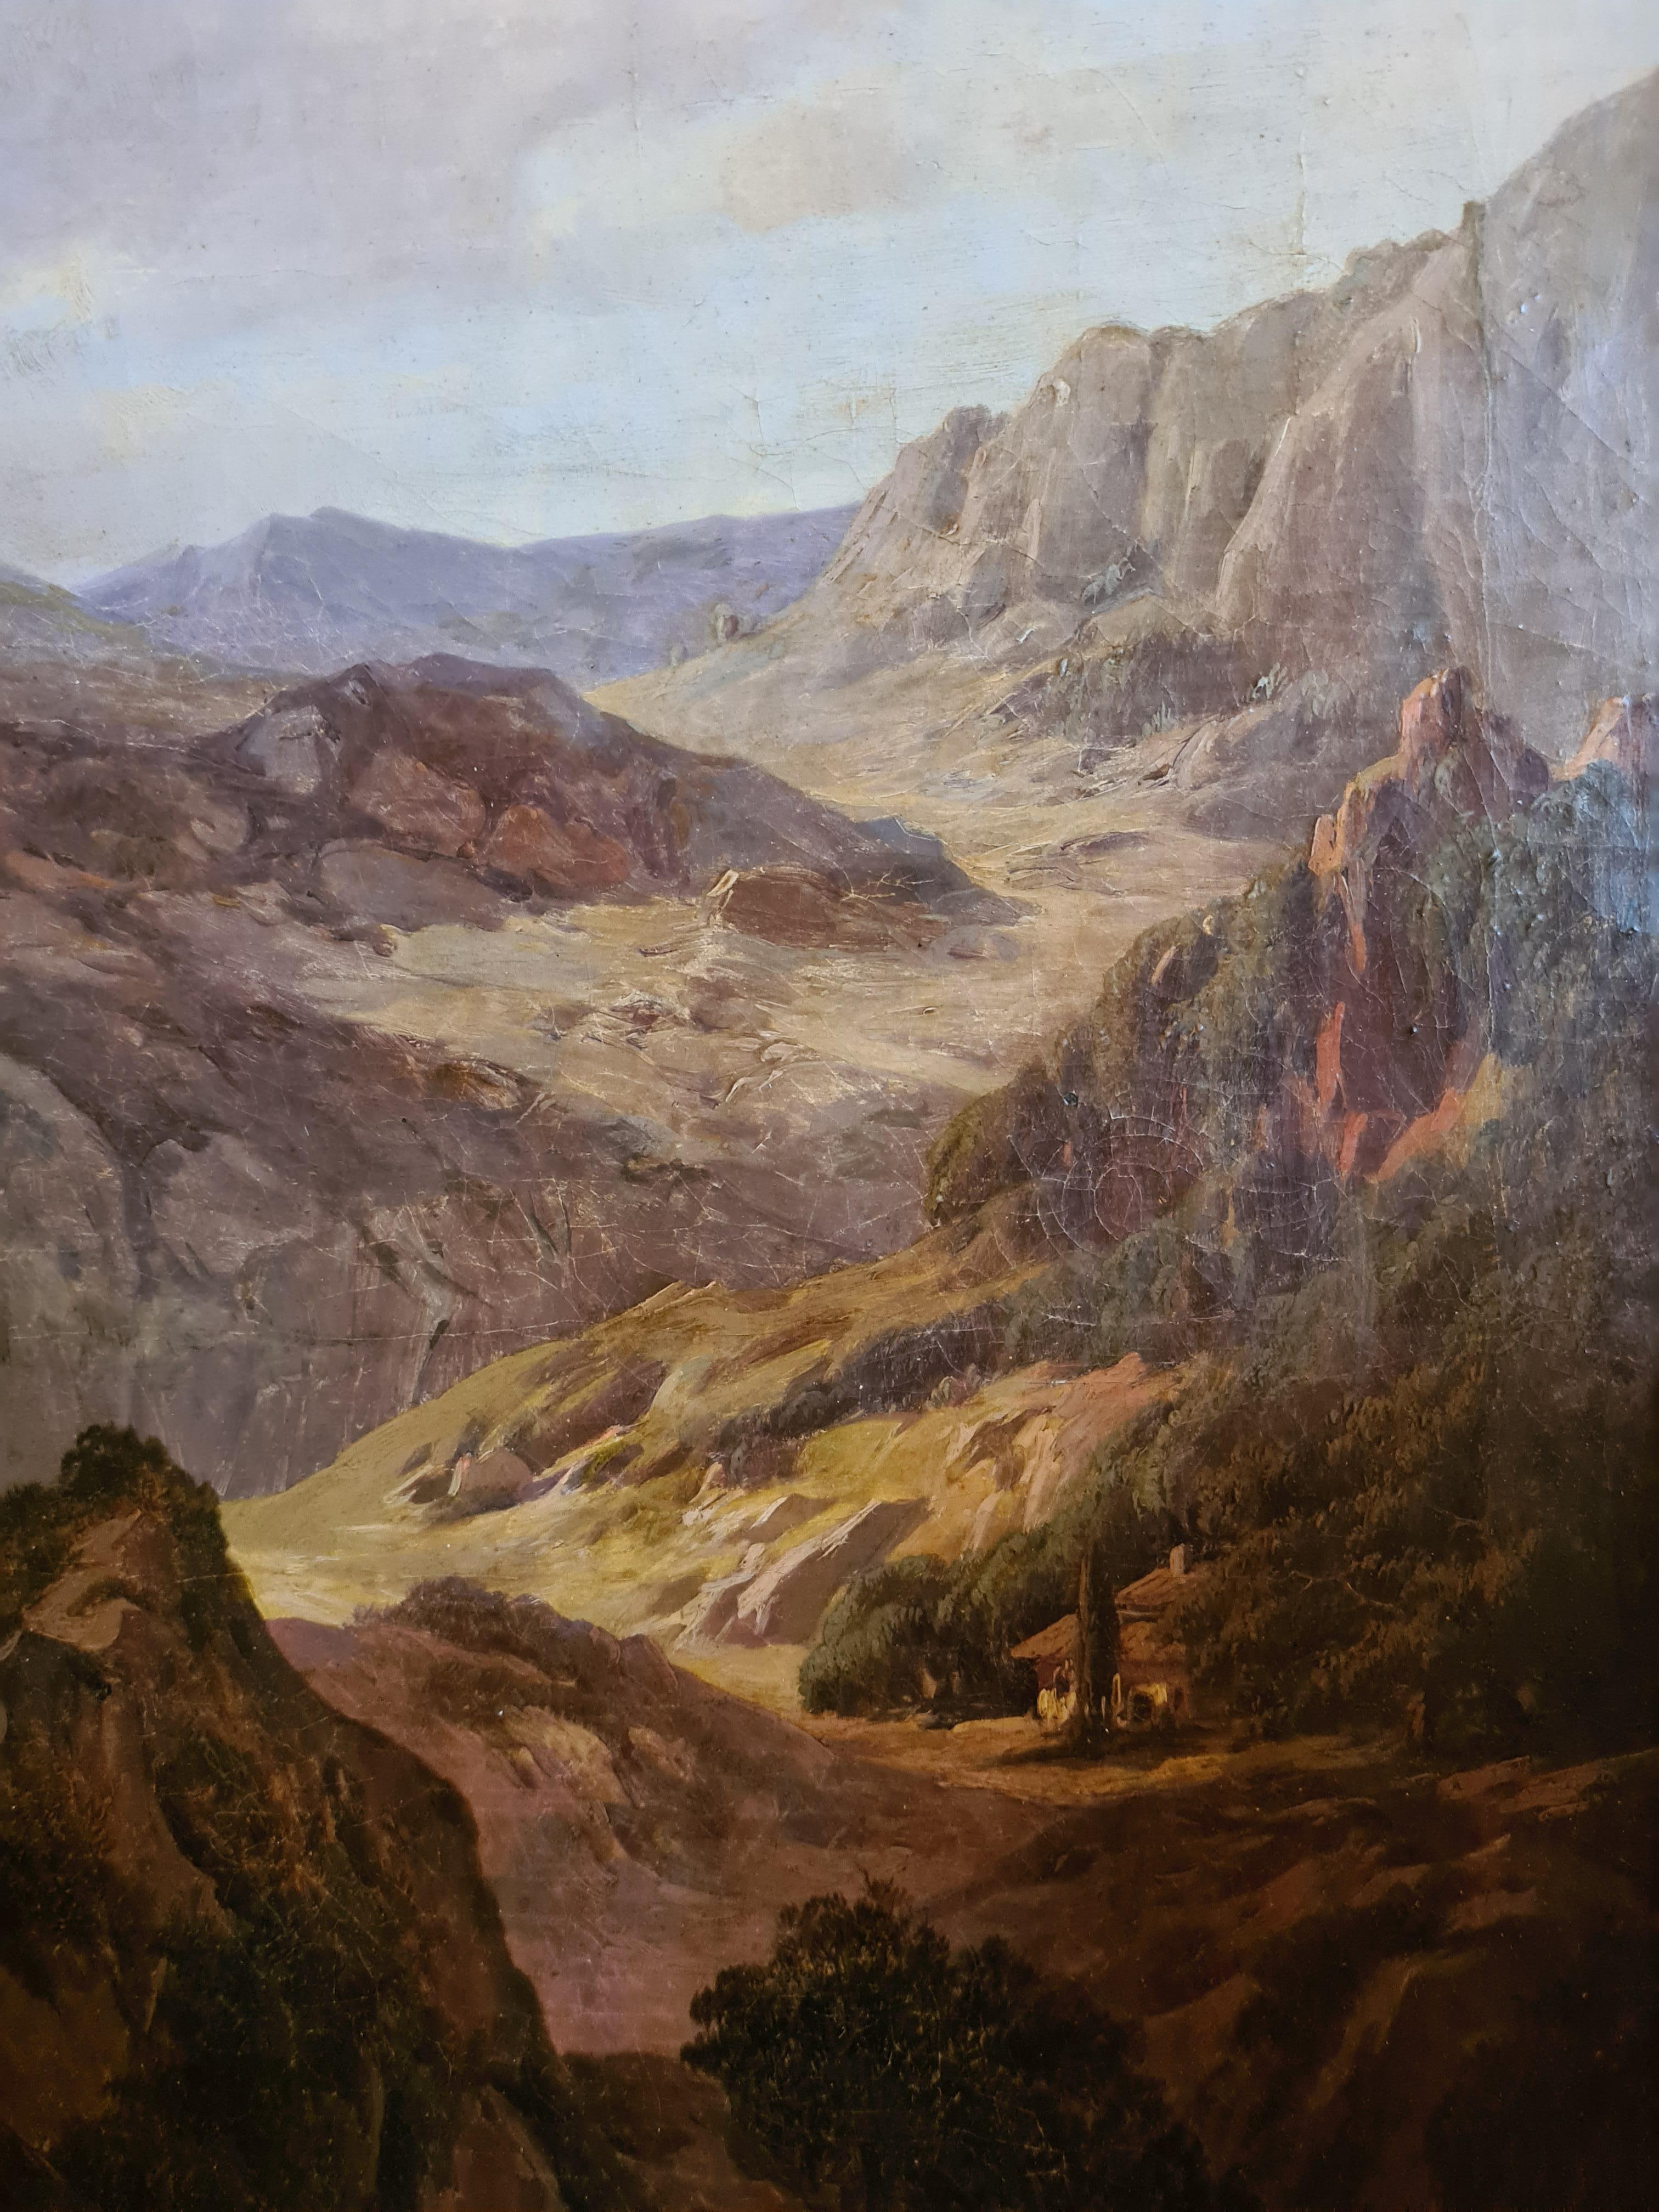 Mid 19th Century oil on canvas view of a Swiss valley and mountainscape by Alexander Calame. The painting is signed bottom left. The canvas is on a fine stretcher with 'keys'. The painting has been in a private collection in the North of France